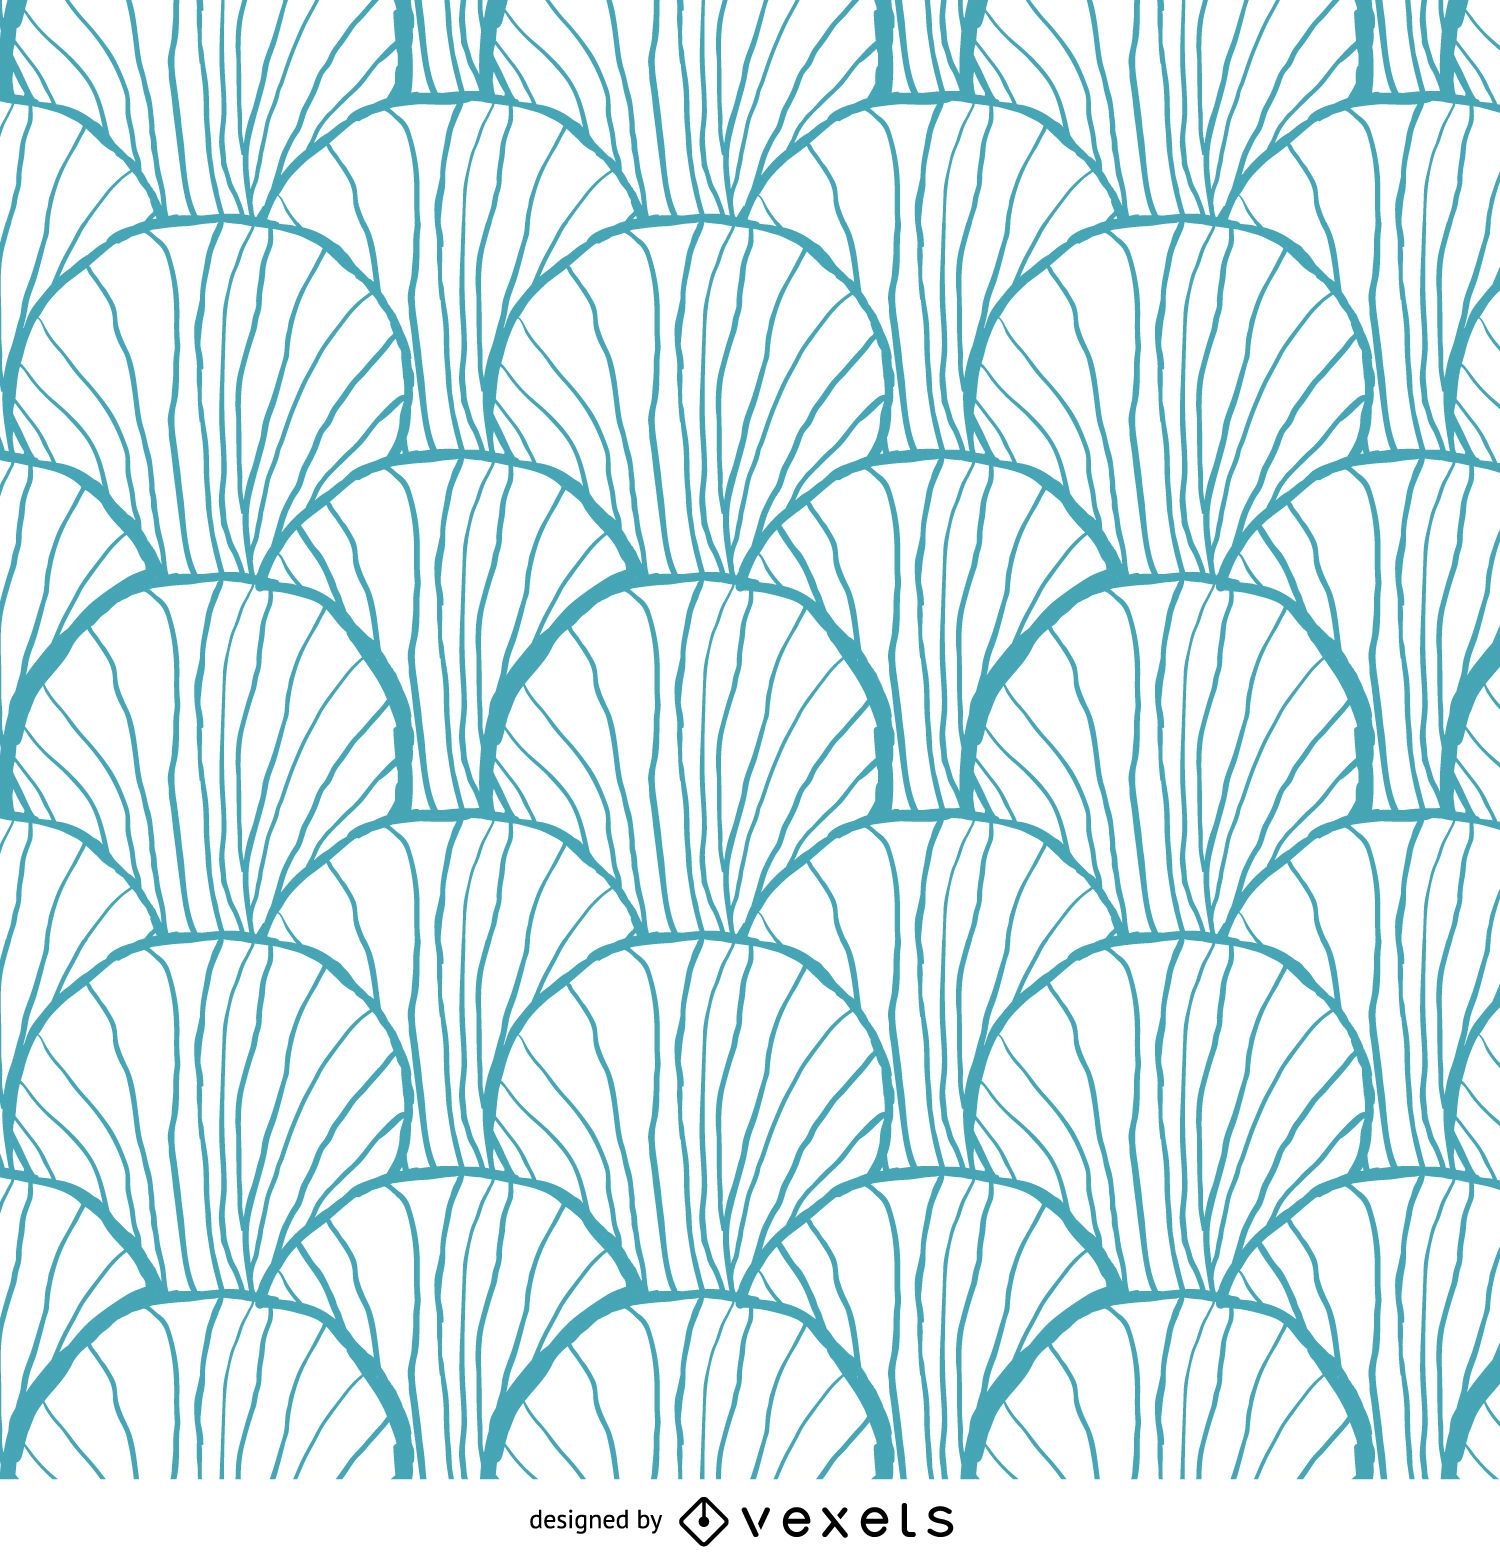 Vintage abstract pattern